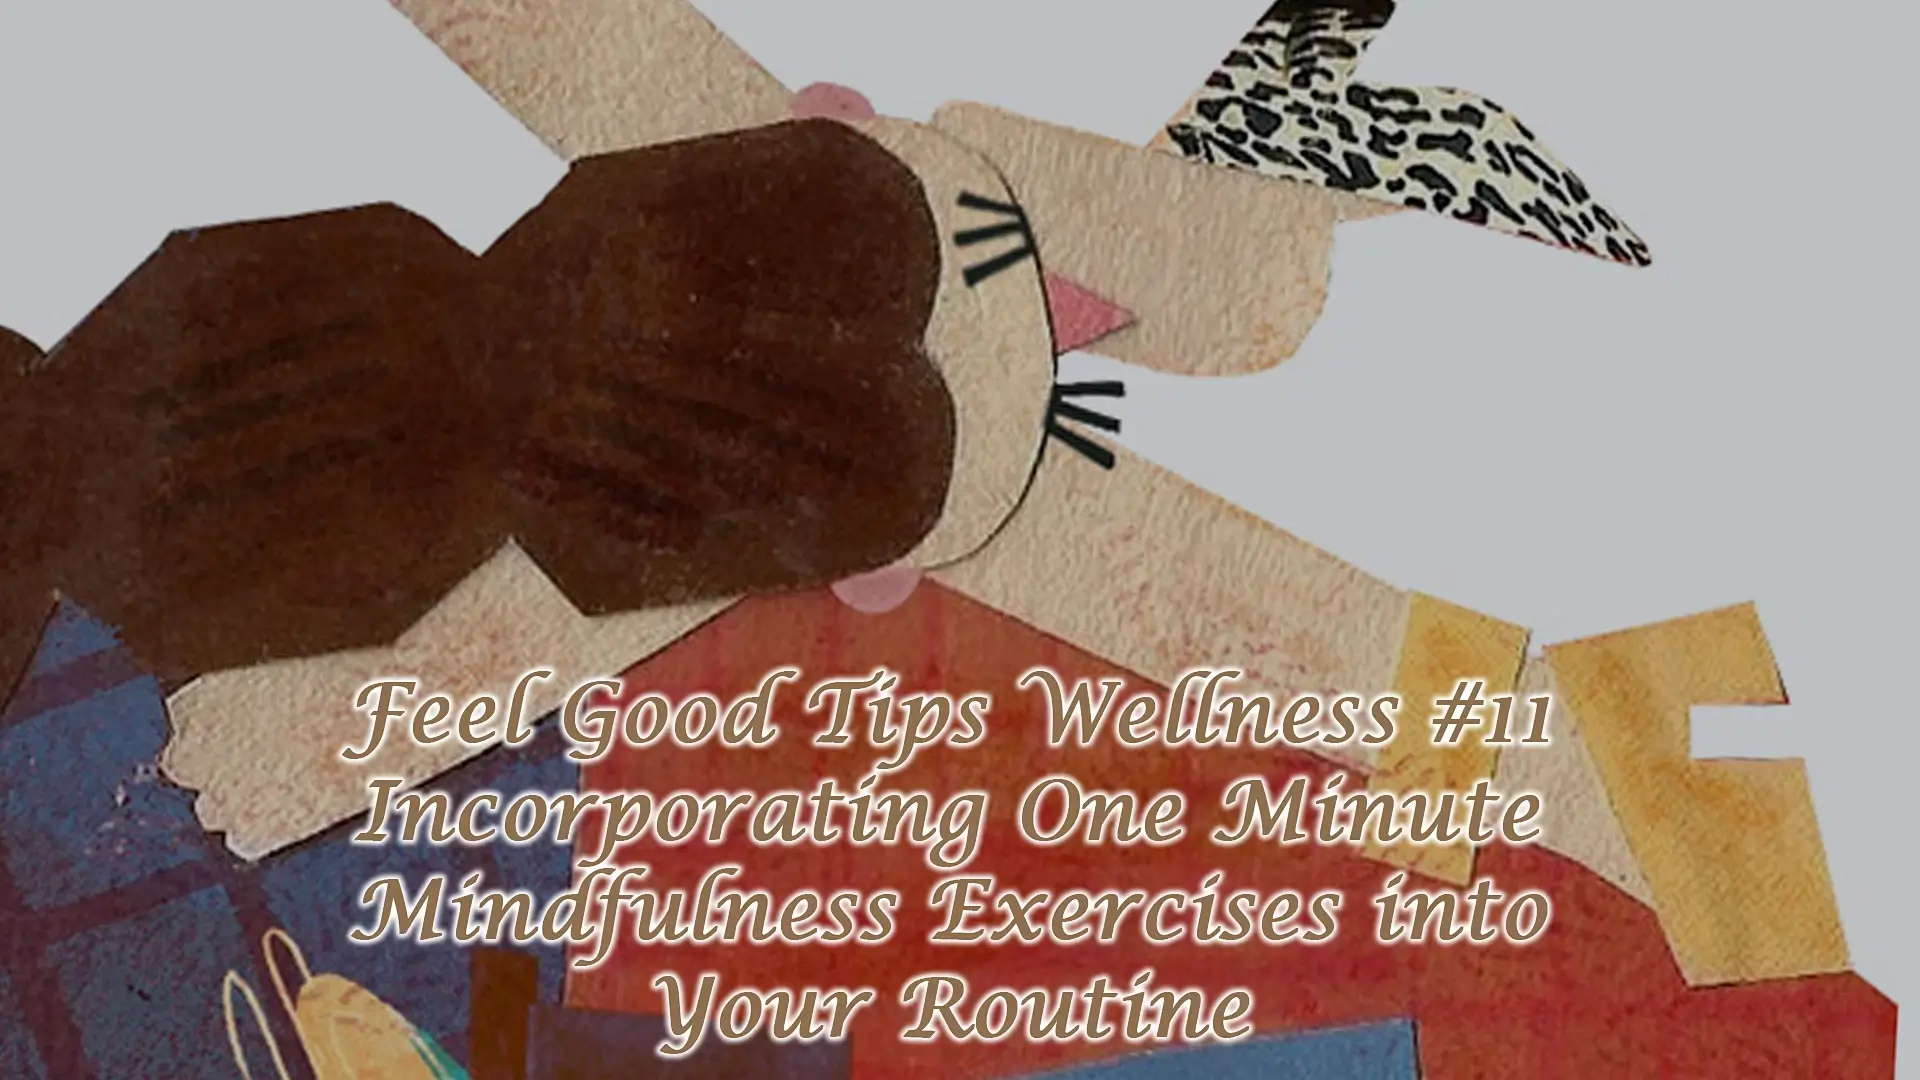 Feel Good Tips Wellness - Incorporating One Minute Mindfulness Exercises into Your Routine